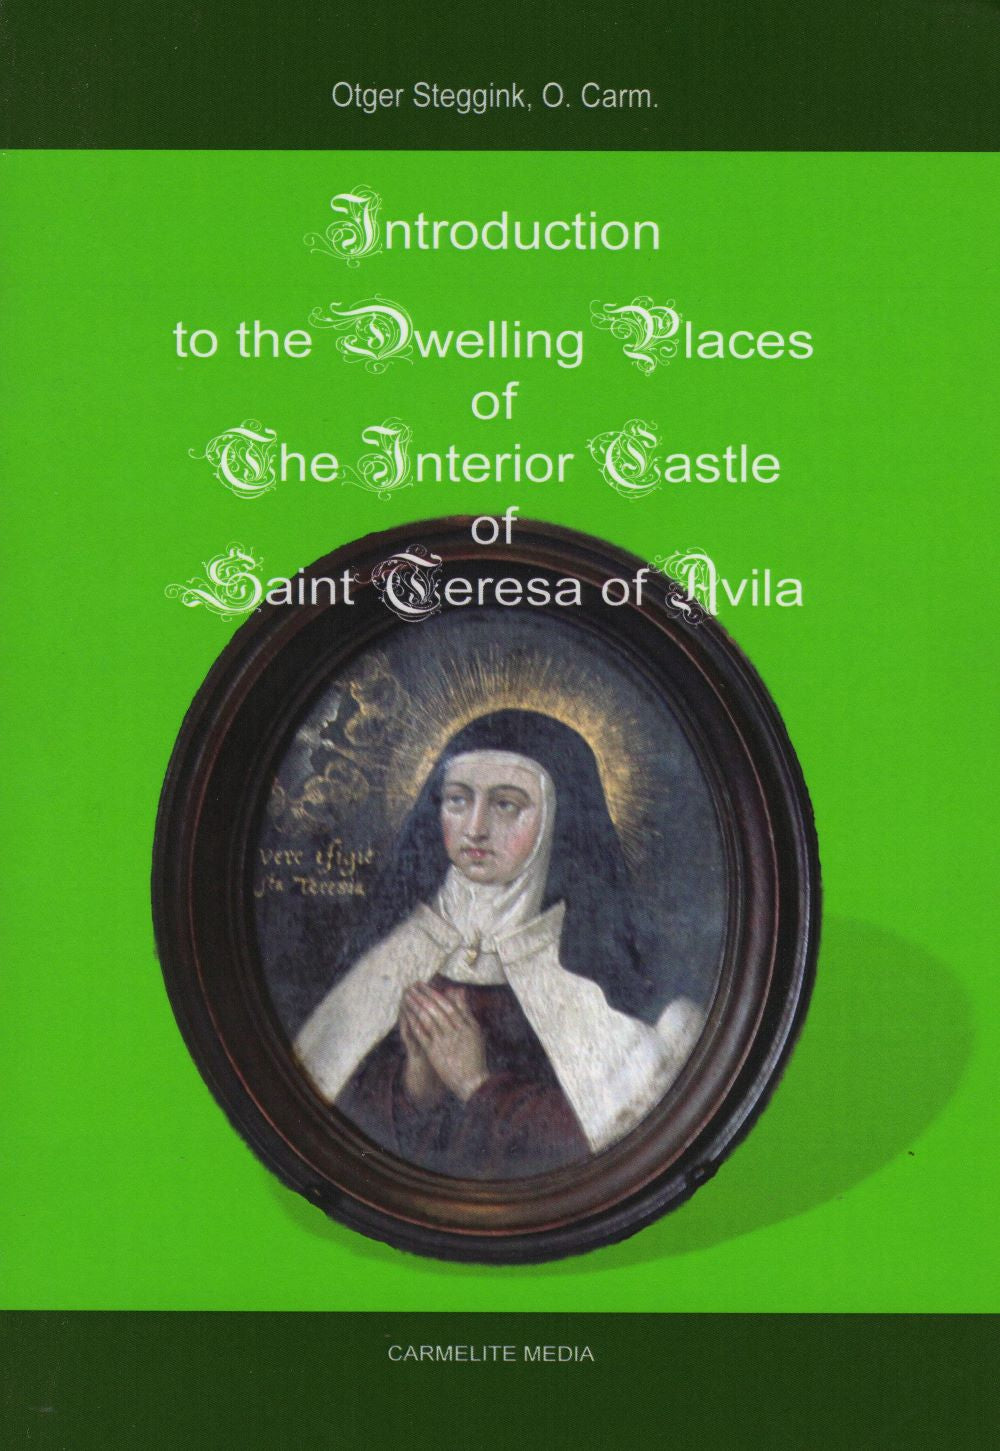 INTRODUCTION TO THE DWELLING PLACES OF THE INTERIOR CASTLE OF SAINT TERESA OF AVILA